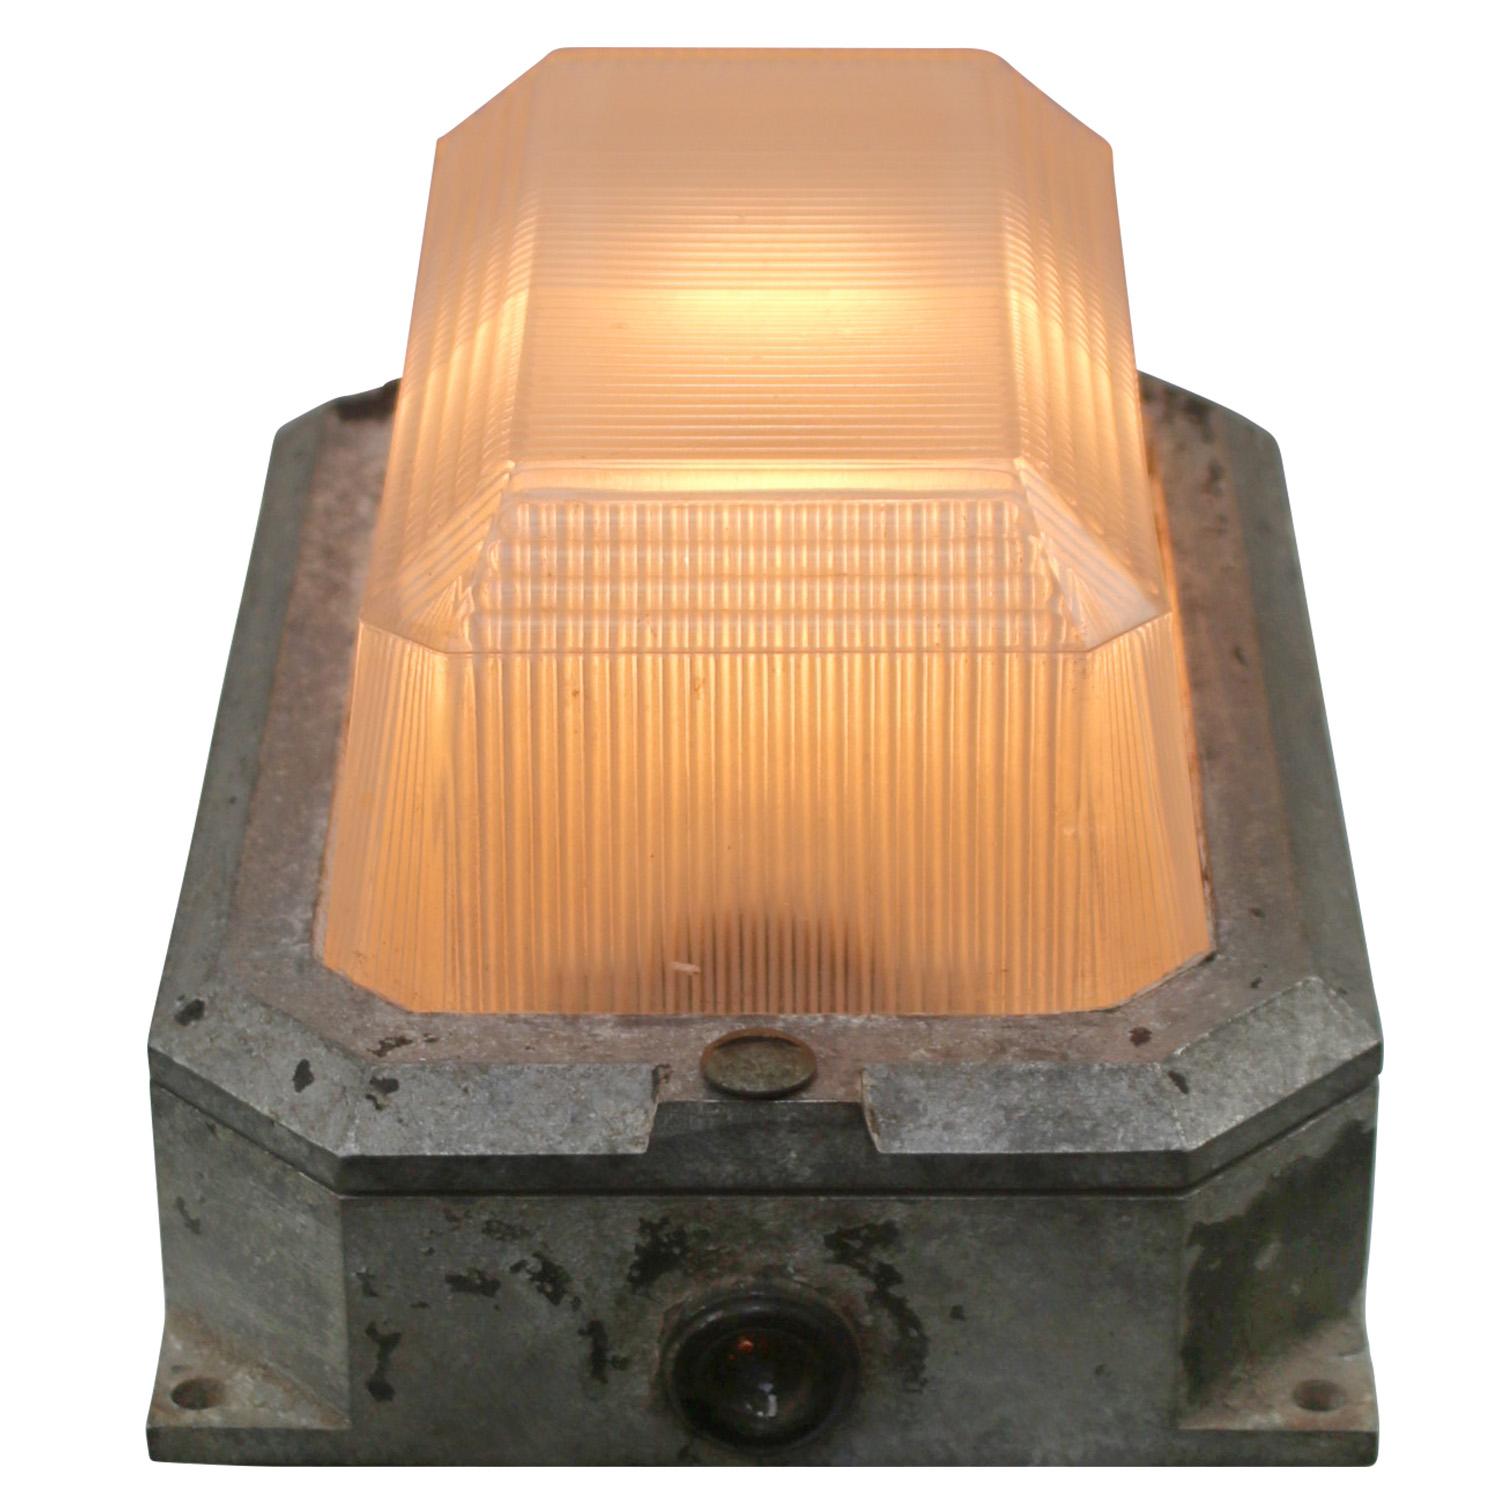 British Industrial wall or ceiling lamp
Cast aluminium, mat frosted prismatic glass

B22 bulb holder

Weight: 2.80 kg / 6.2 lb

Priced per individual item. All lamps have been made suitable by international standards for incandescent light bulbs,